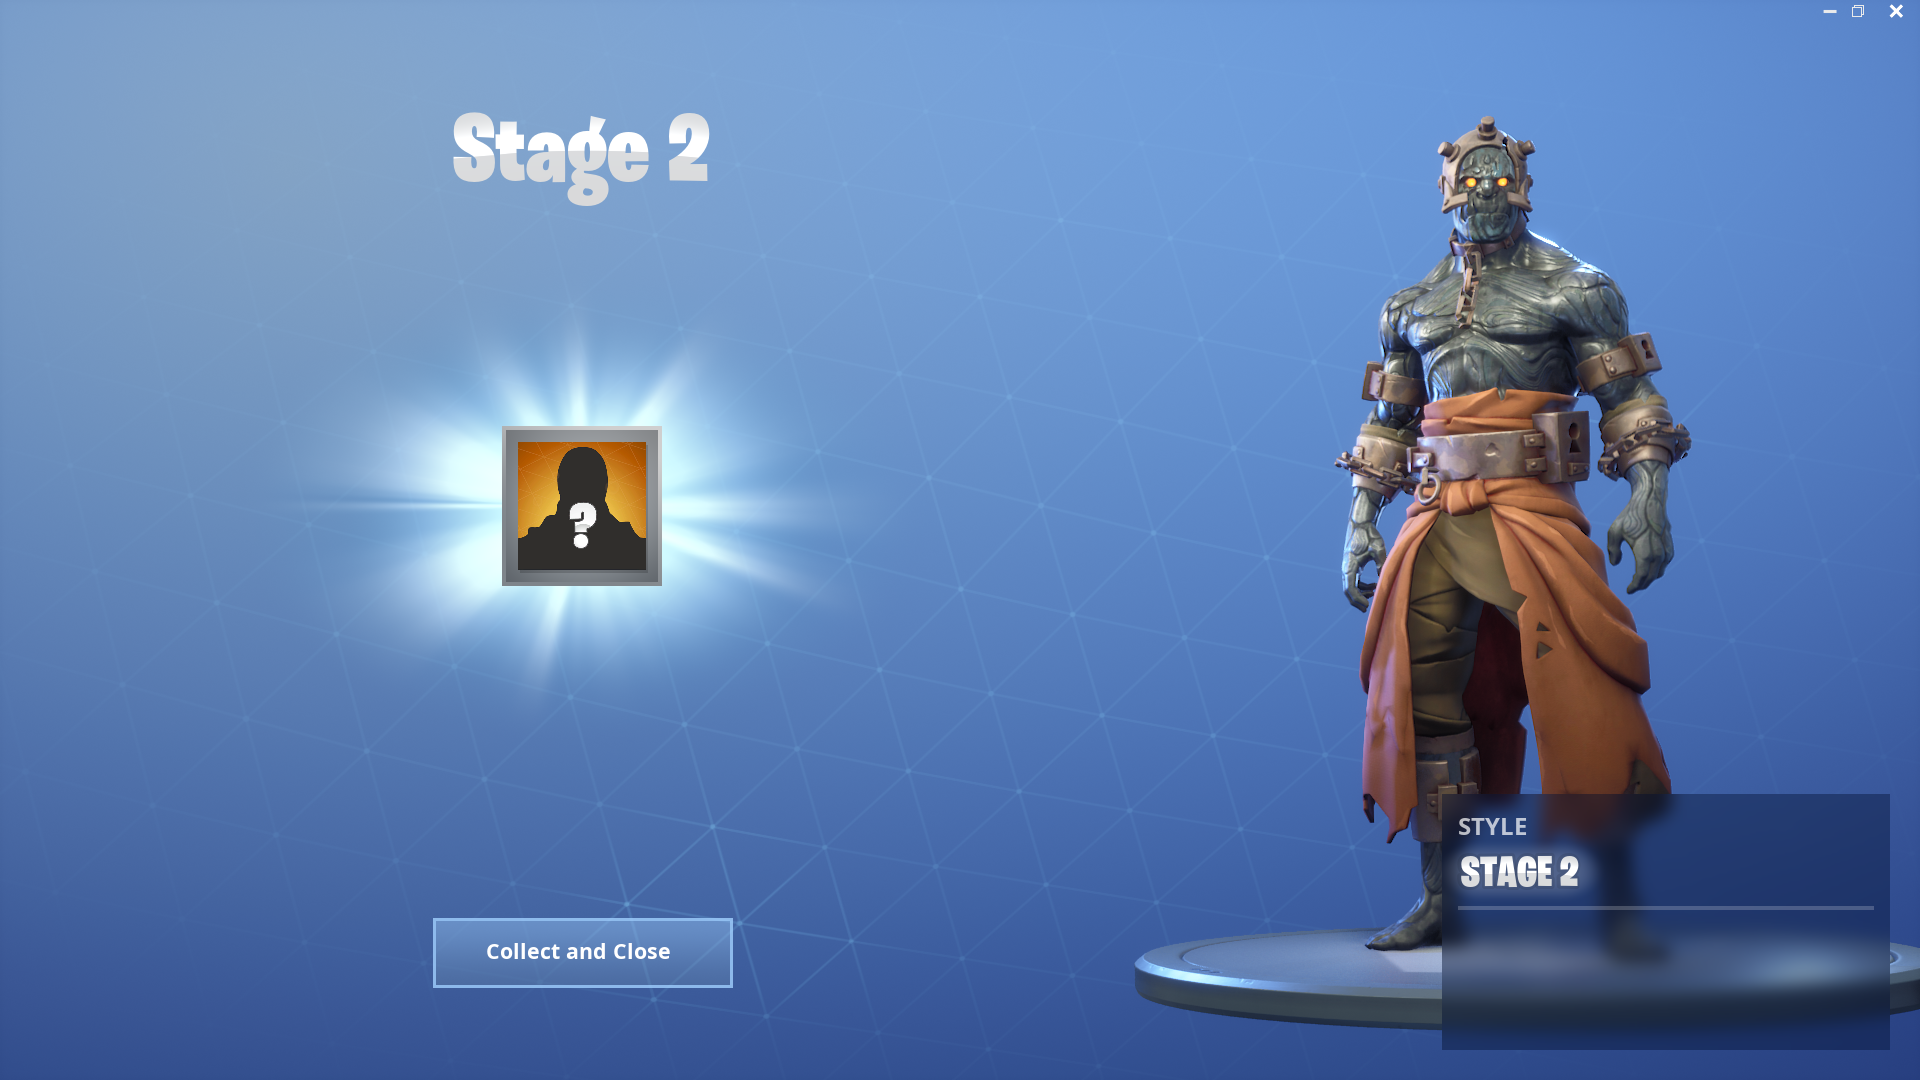 H!   ow To Unlock Stage 2 Of The Prisoner Skin In Fortnite Battle Royale - how to unlock stage 2 of the prisoner skin in fortnite